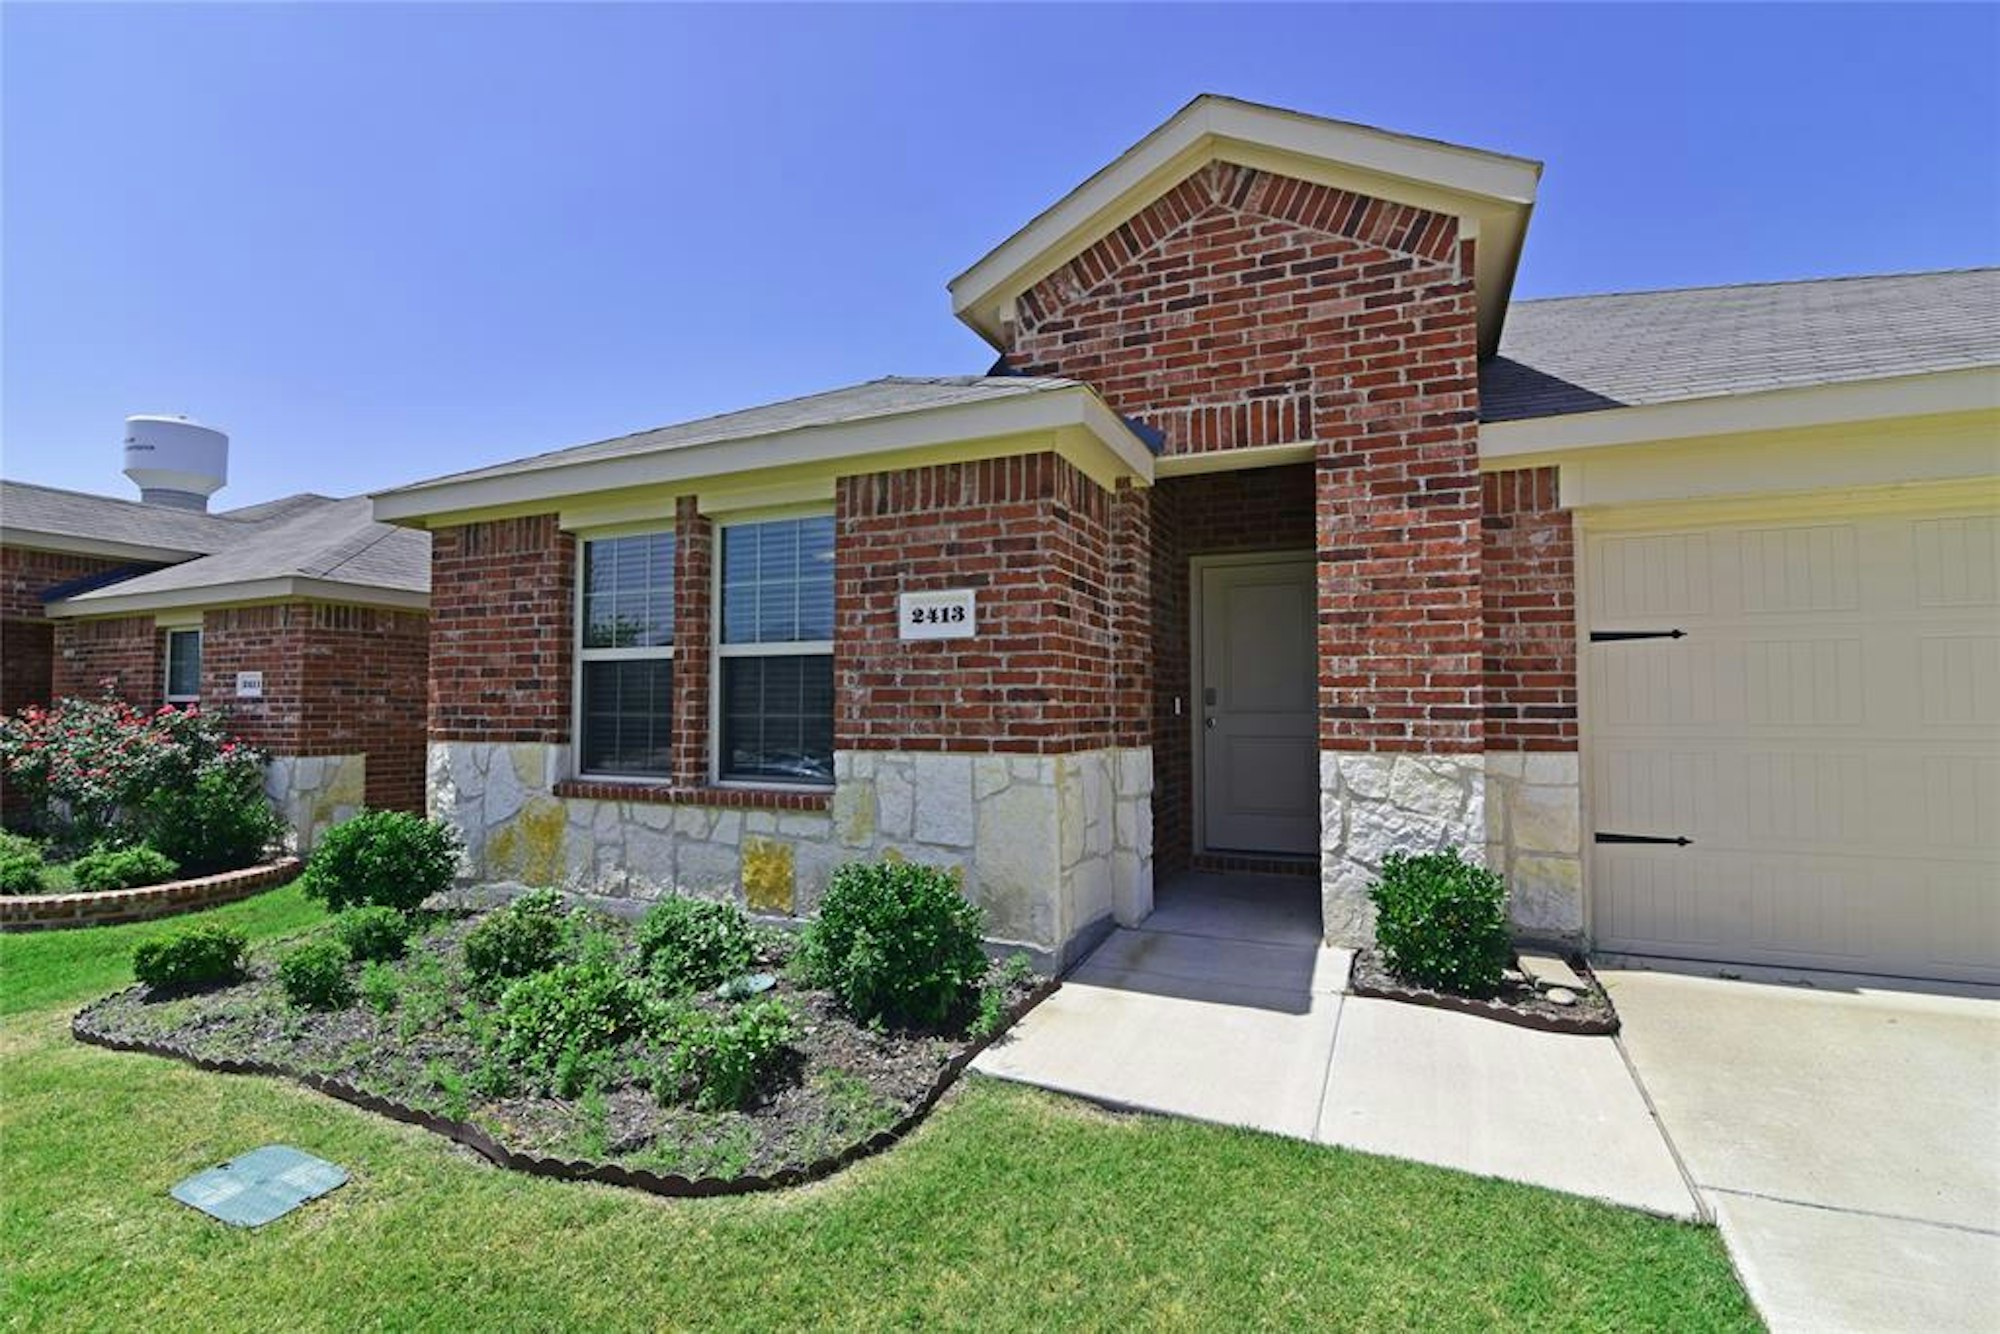 Photo 1 of 28 - 2413 Karnack Dr, Forney, TX 75126